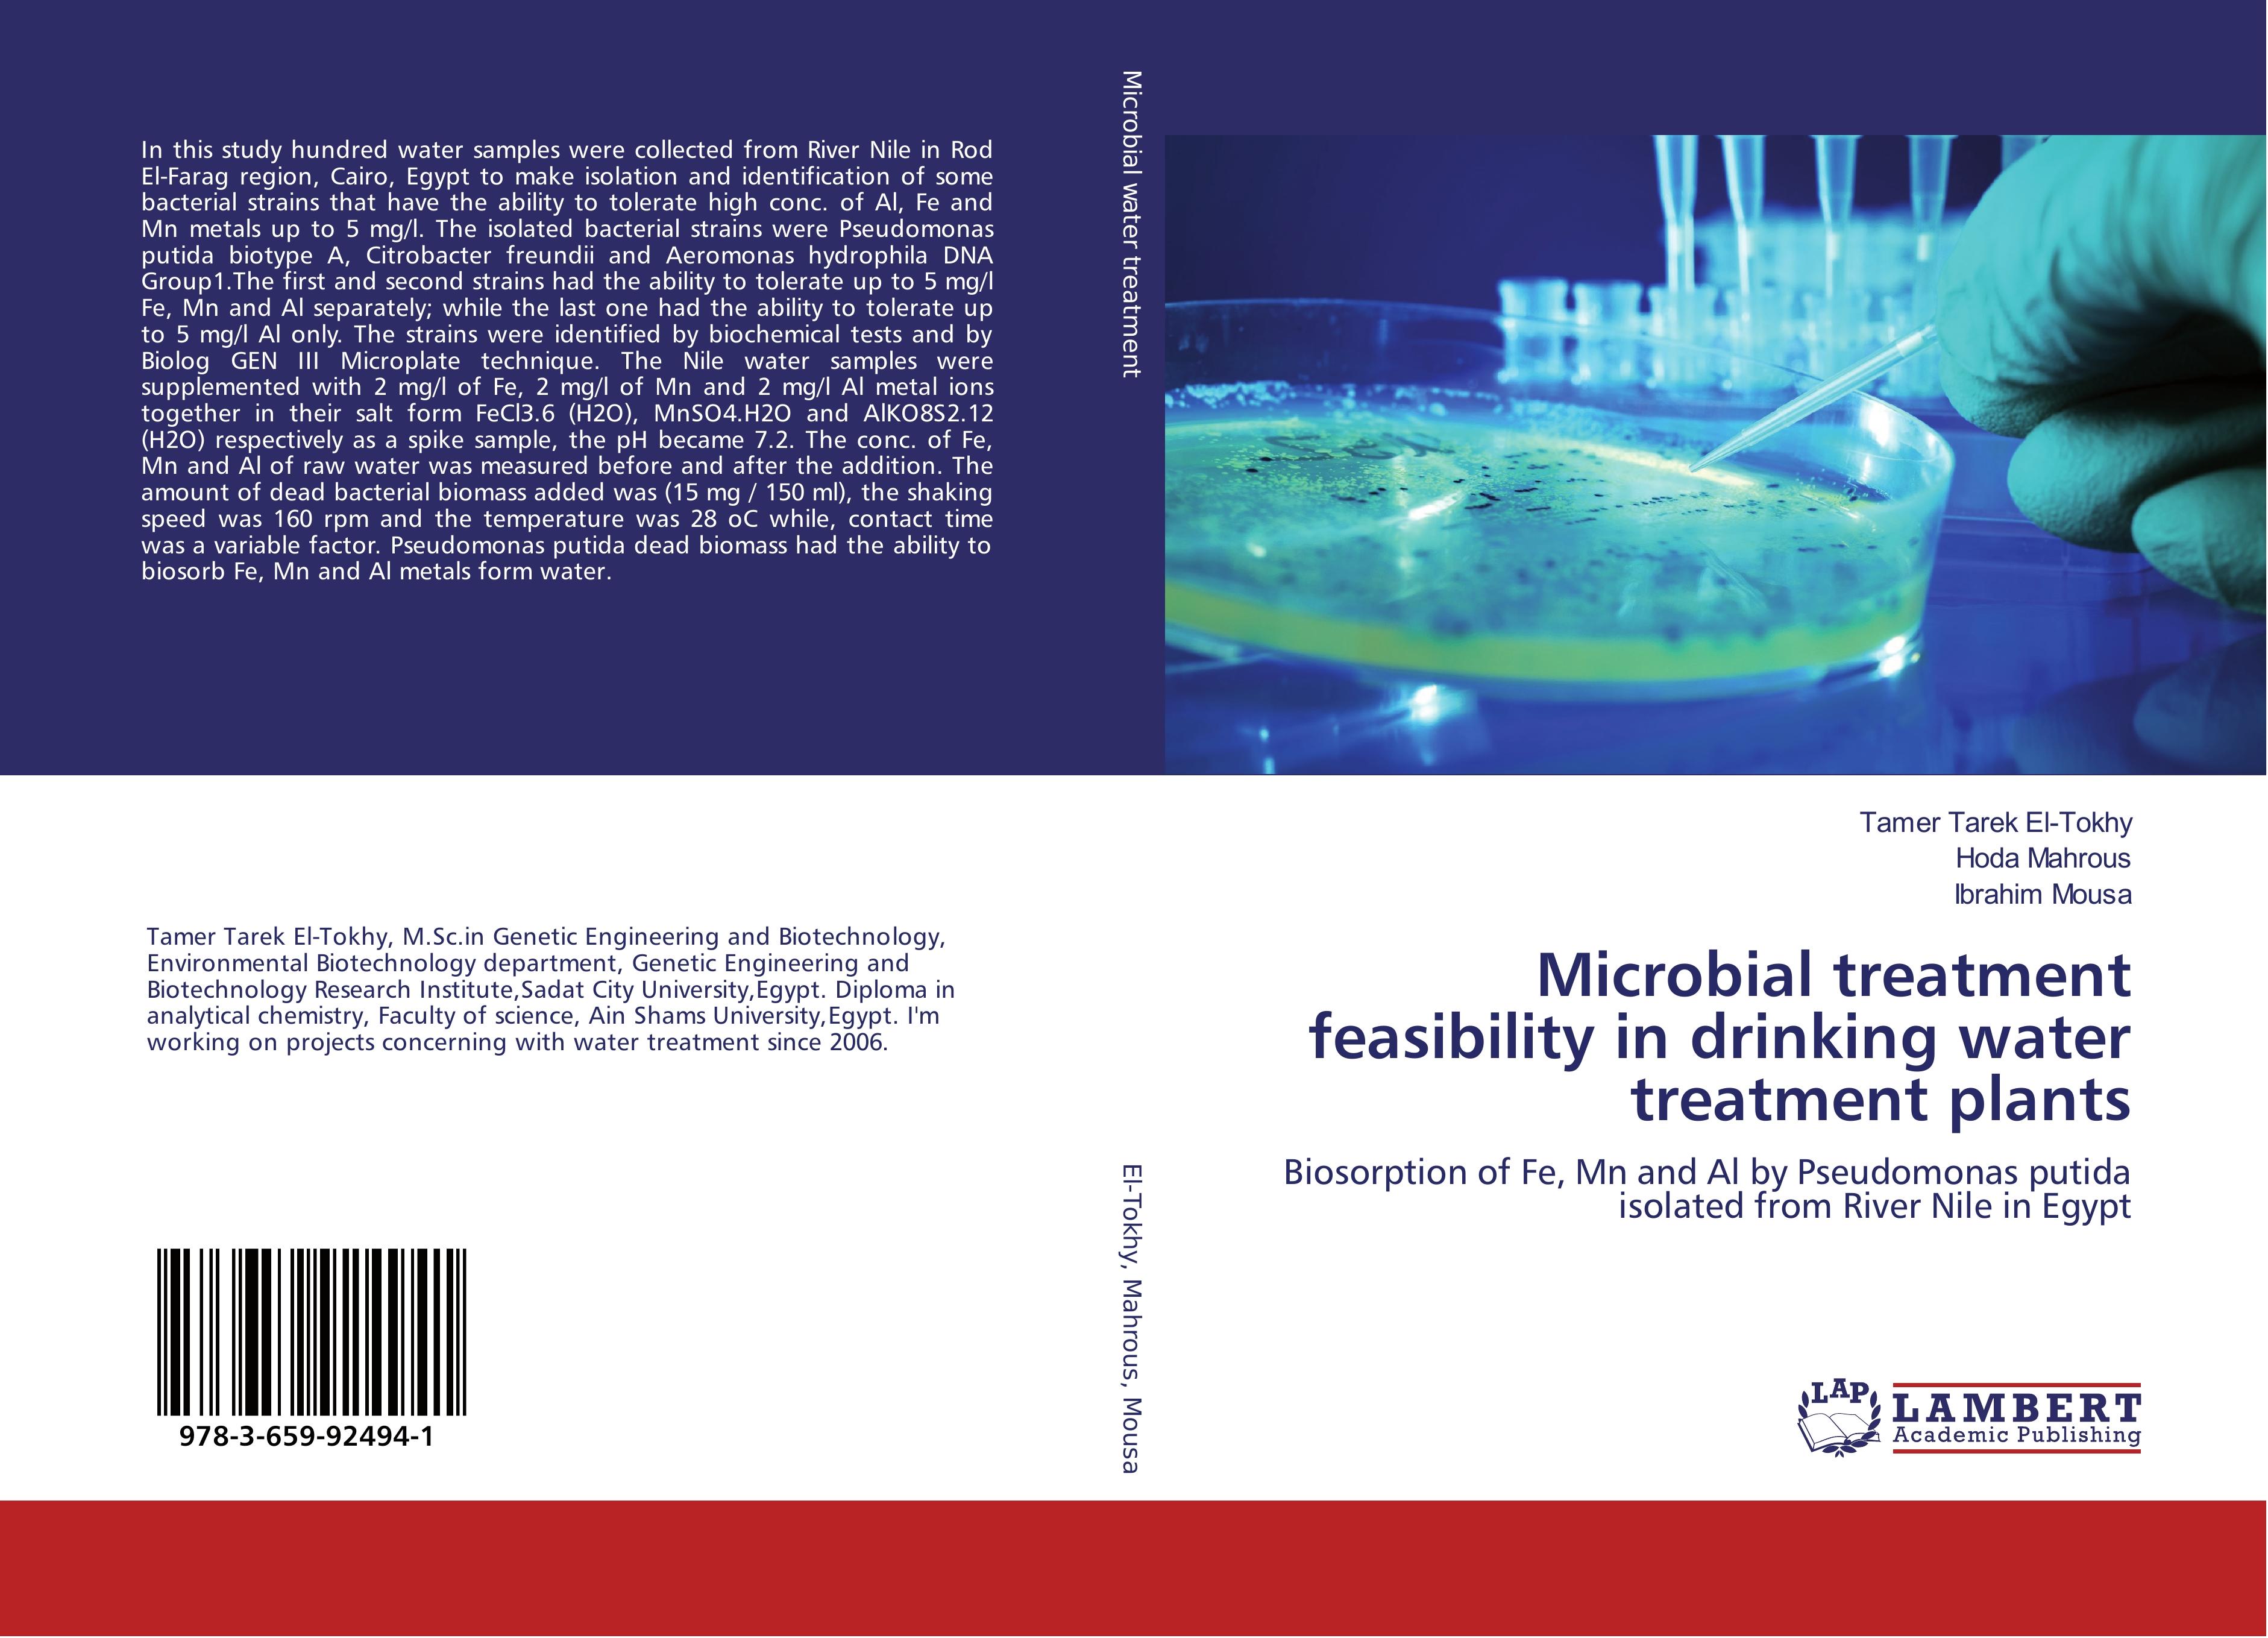 Microbial treatment feasibility in drinking water treatment plants | Biosorption of Fe, Mn and Al by Pseudomonas putida isolated from River Nile in Egypt | Tamer Tarek El-Tokhy (u. a.) | Taschenbuch - El-Tokhy, Tamer Tarek